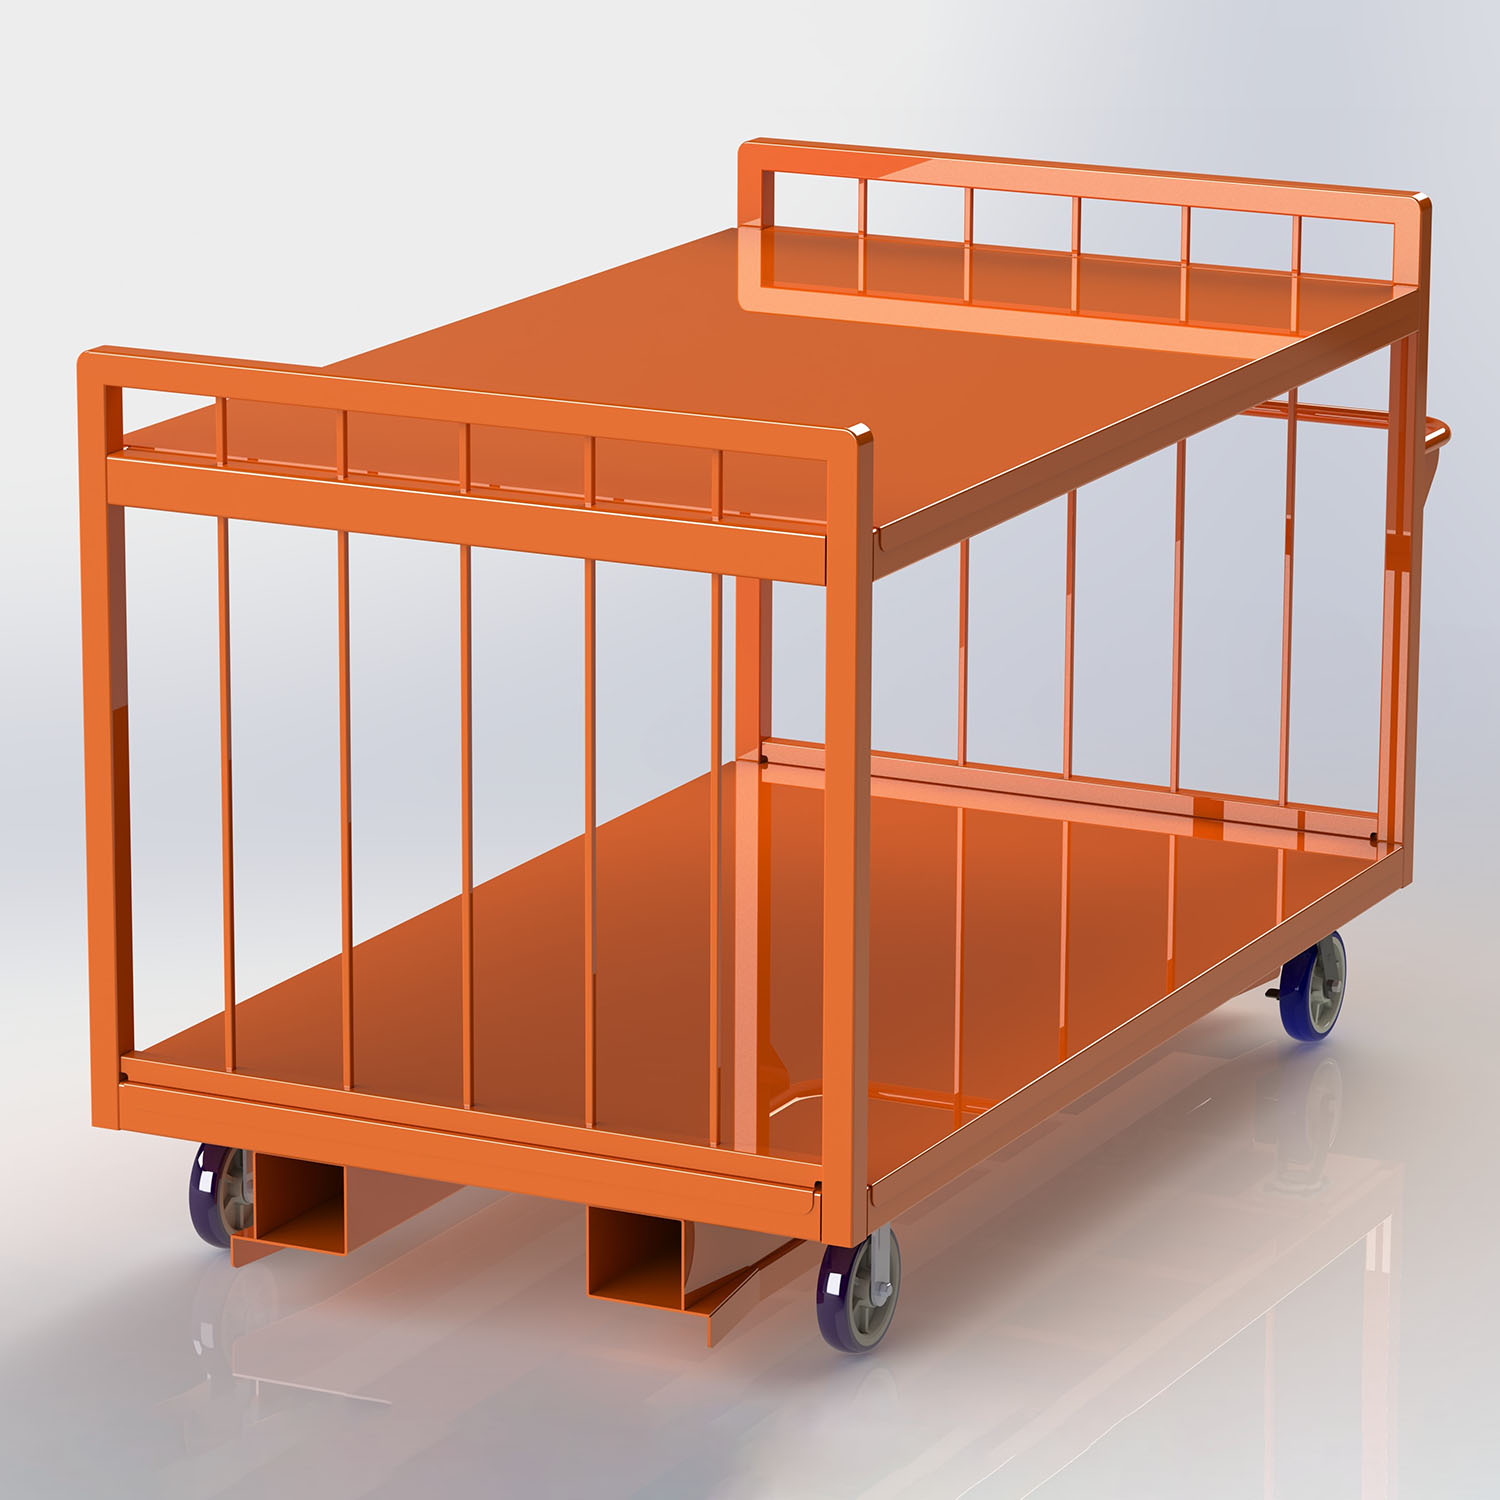 Forklift Compatible. Universal forklift-accepting pockets. Pockets accessible from back end of cart.